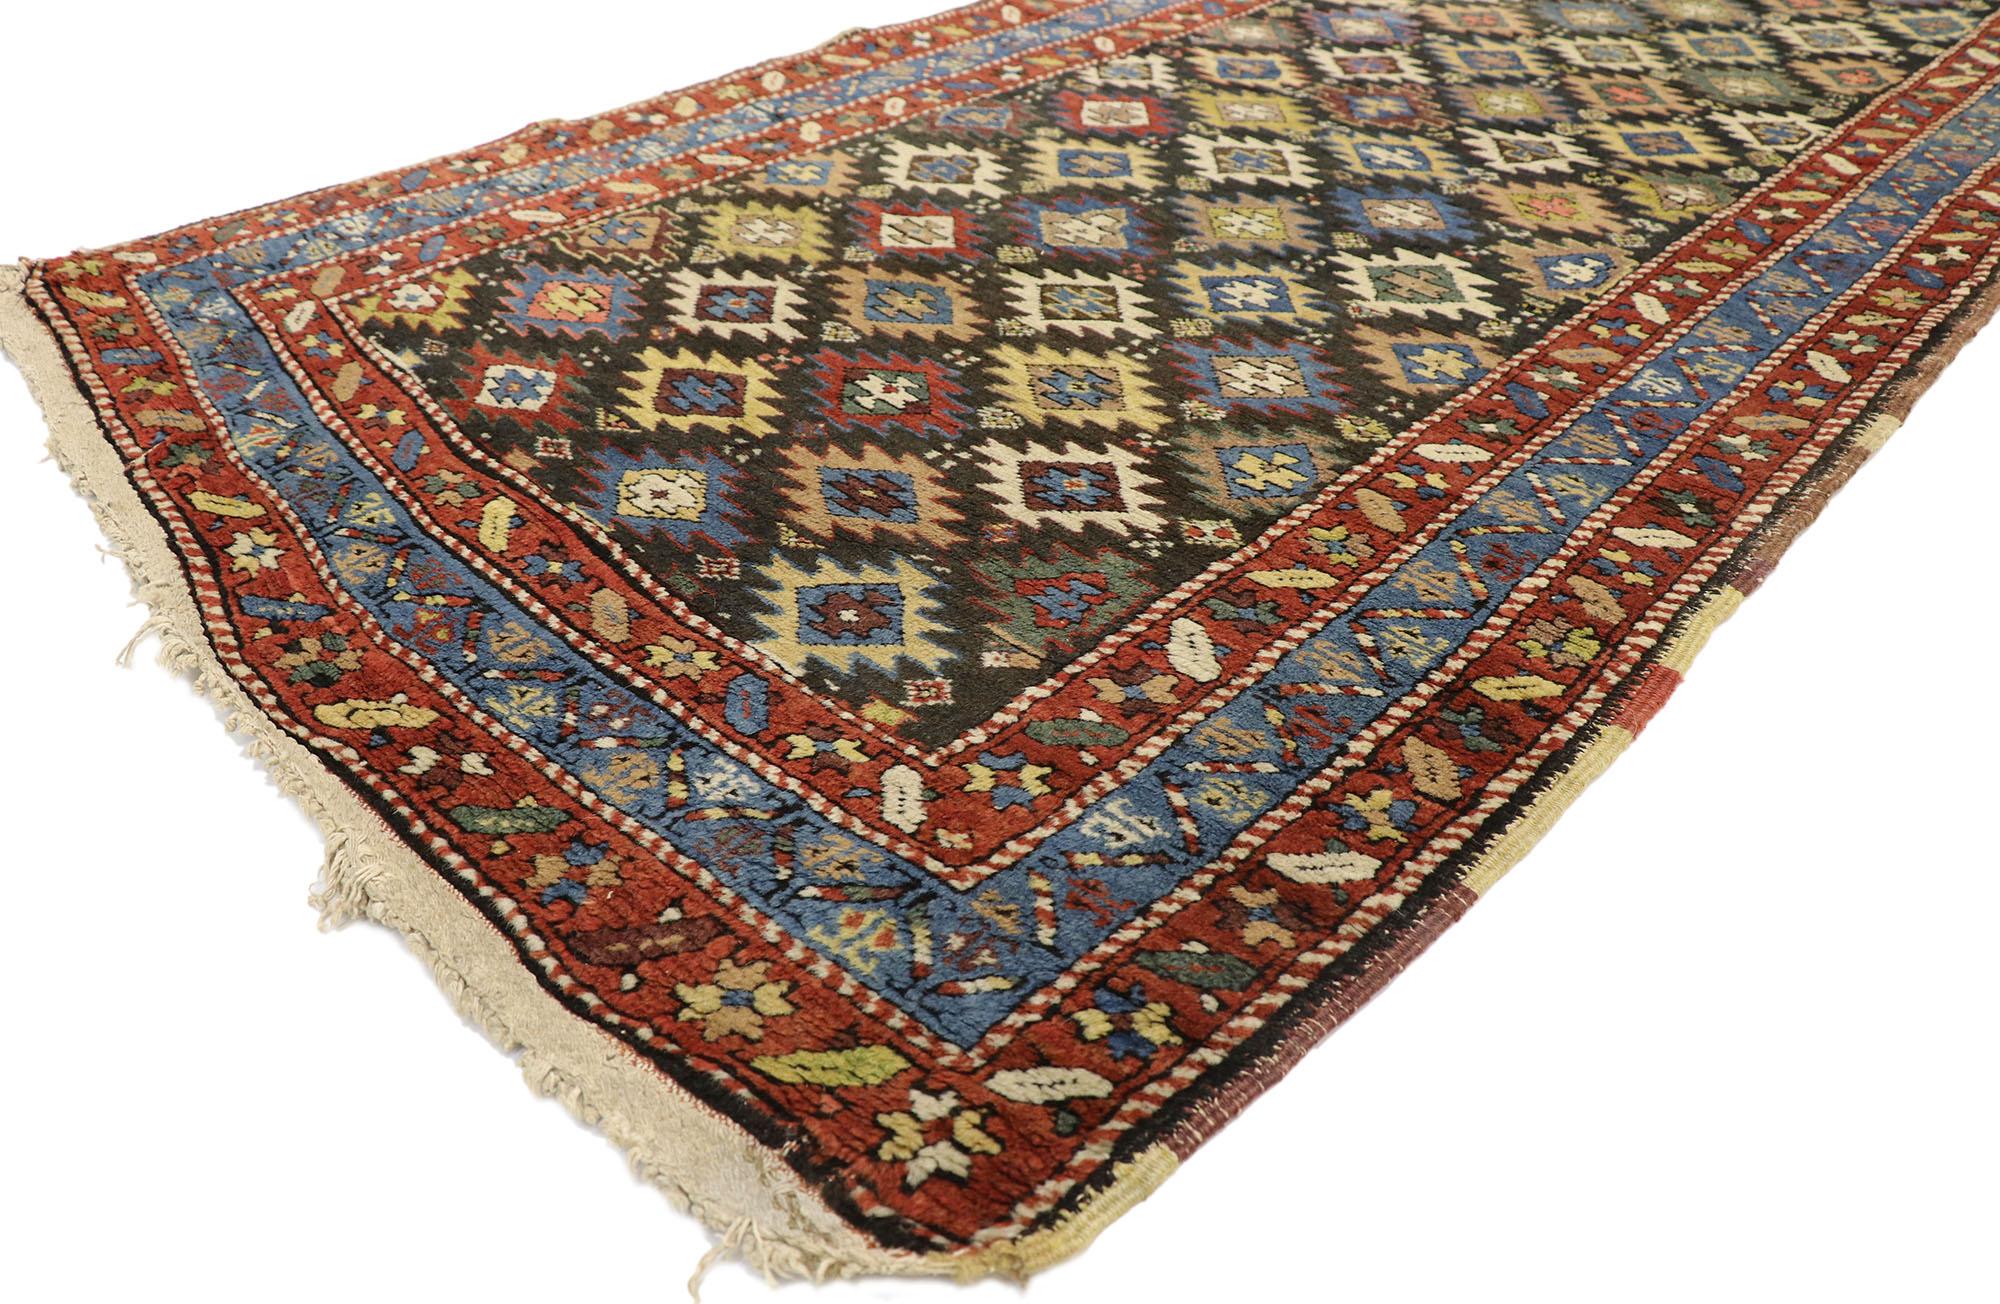 73255, antique Kurdish Persian Hallway runner with Modern Tribal style 03'02 x 13'08. Reflecting extraordinary detail and modern tribal style with an intimate patina, this hand knotted wool antique Kurdish Persian runner features an all-over